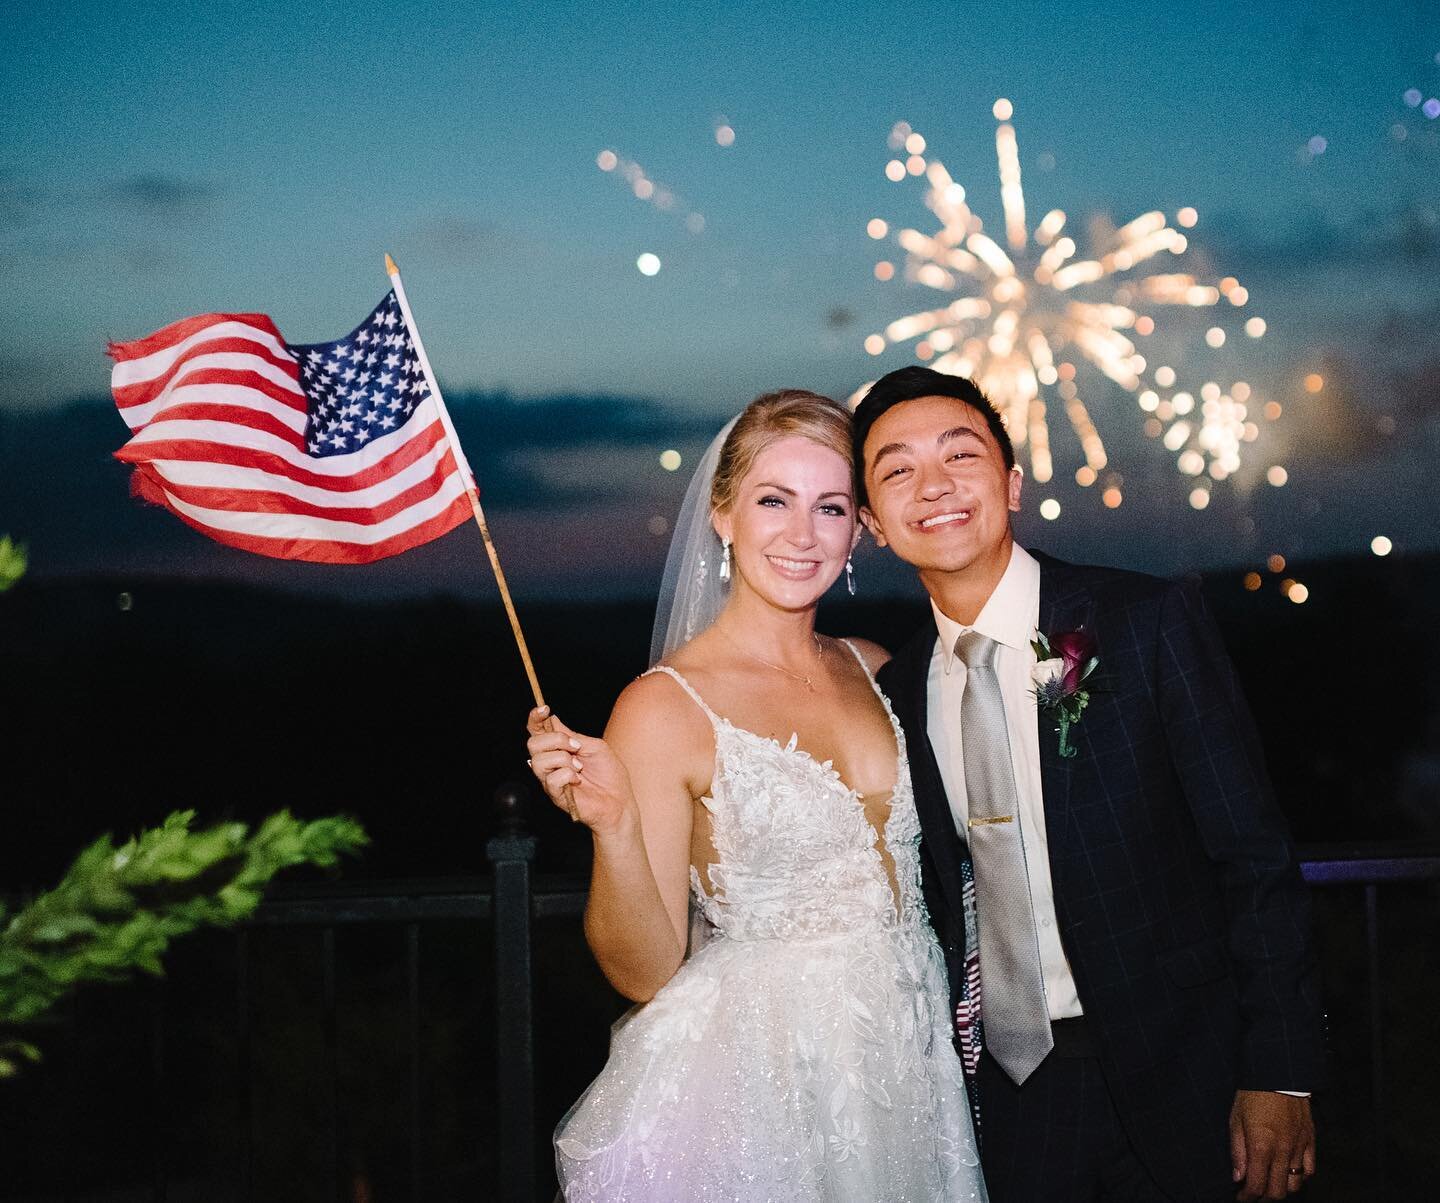 Happy Birthday America! 🇺🇸 Hope y&rsquo;all have a fun and safe 4th!
#weddingphotography #missouriwedding #fourthofjuly